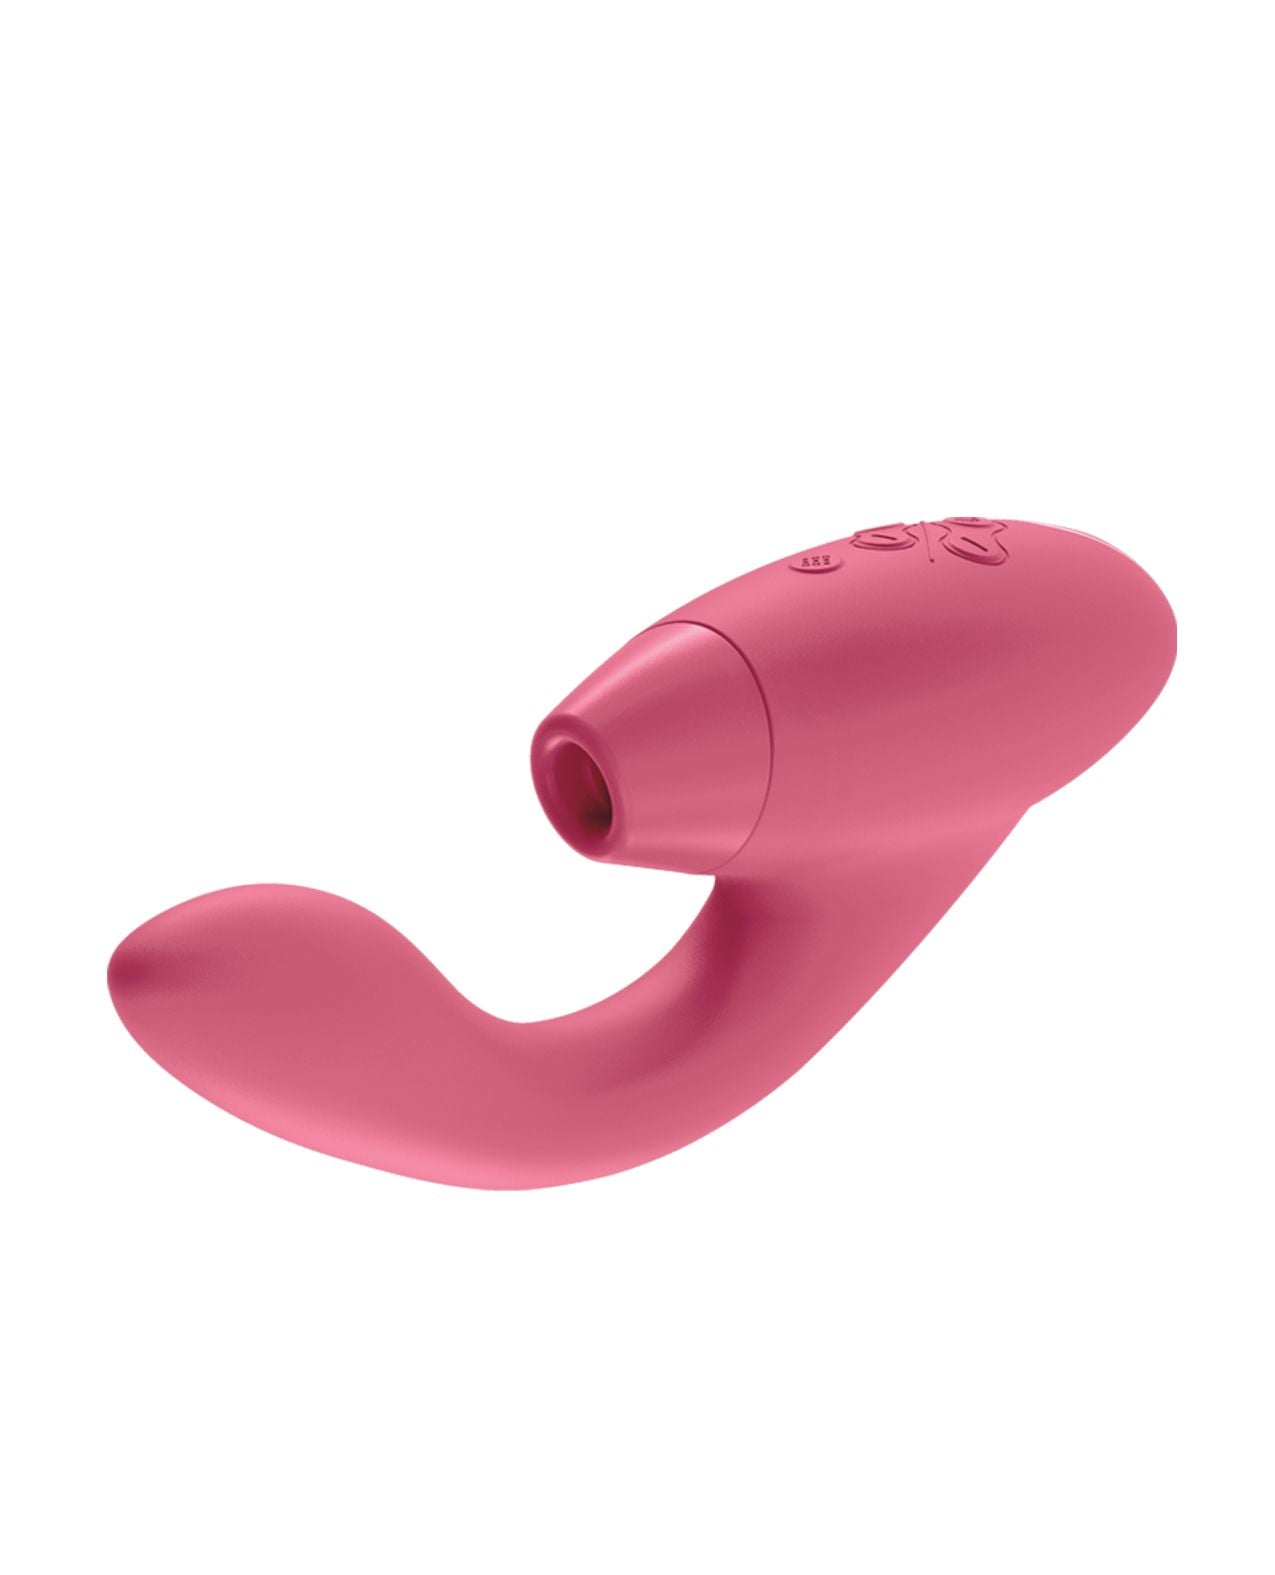 Front side angle view of the Duo showing its clitoral opening, flexible G-spot stimulator, power and control buttons located on the top, hand-held portion of the toy (raspberry).